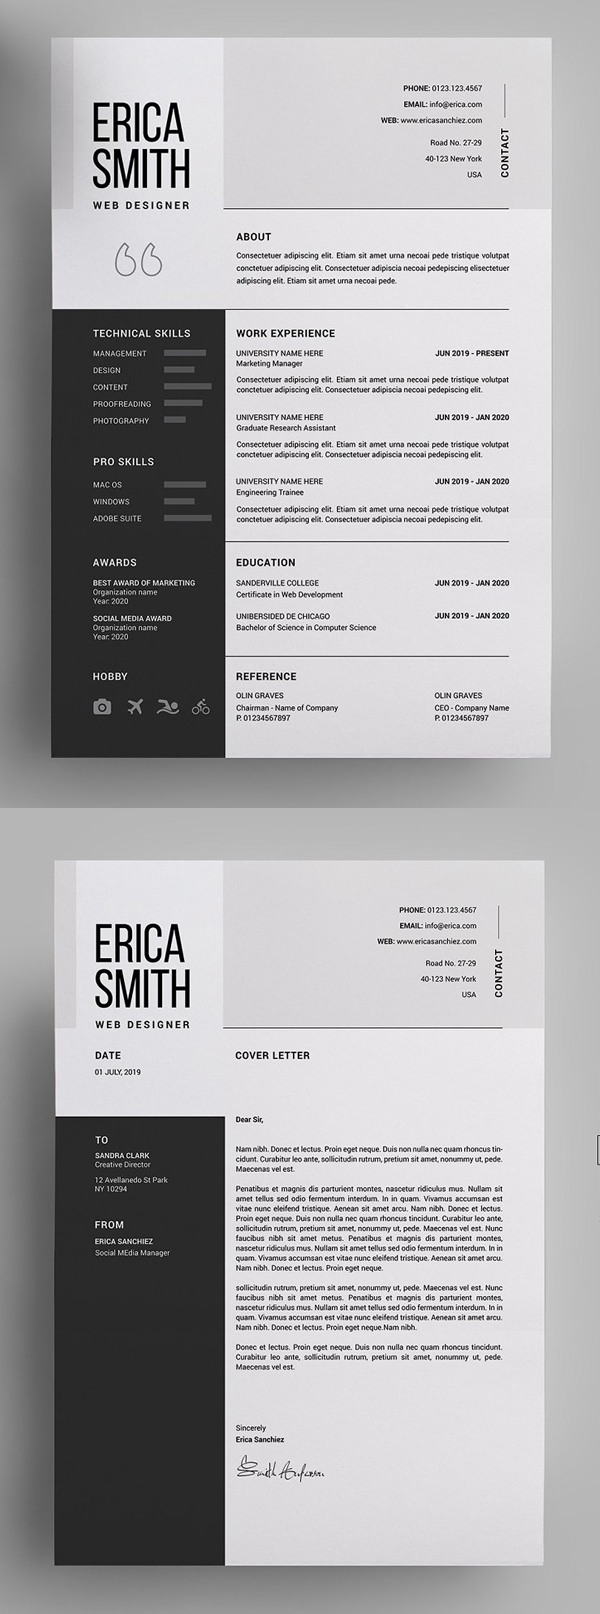 Clean, Modern and Professional Resume and Letterhead design